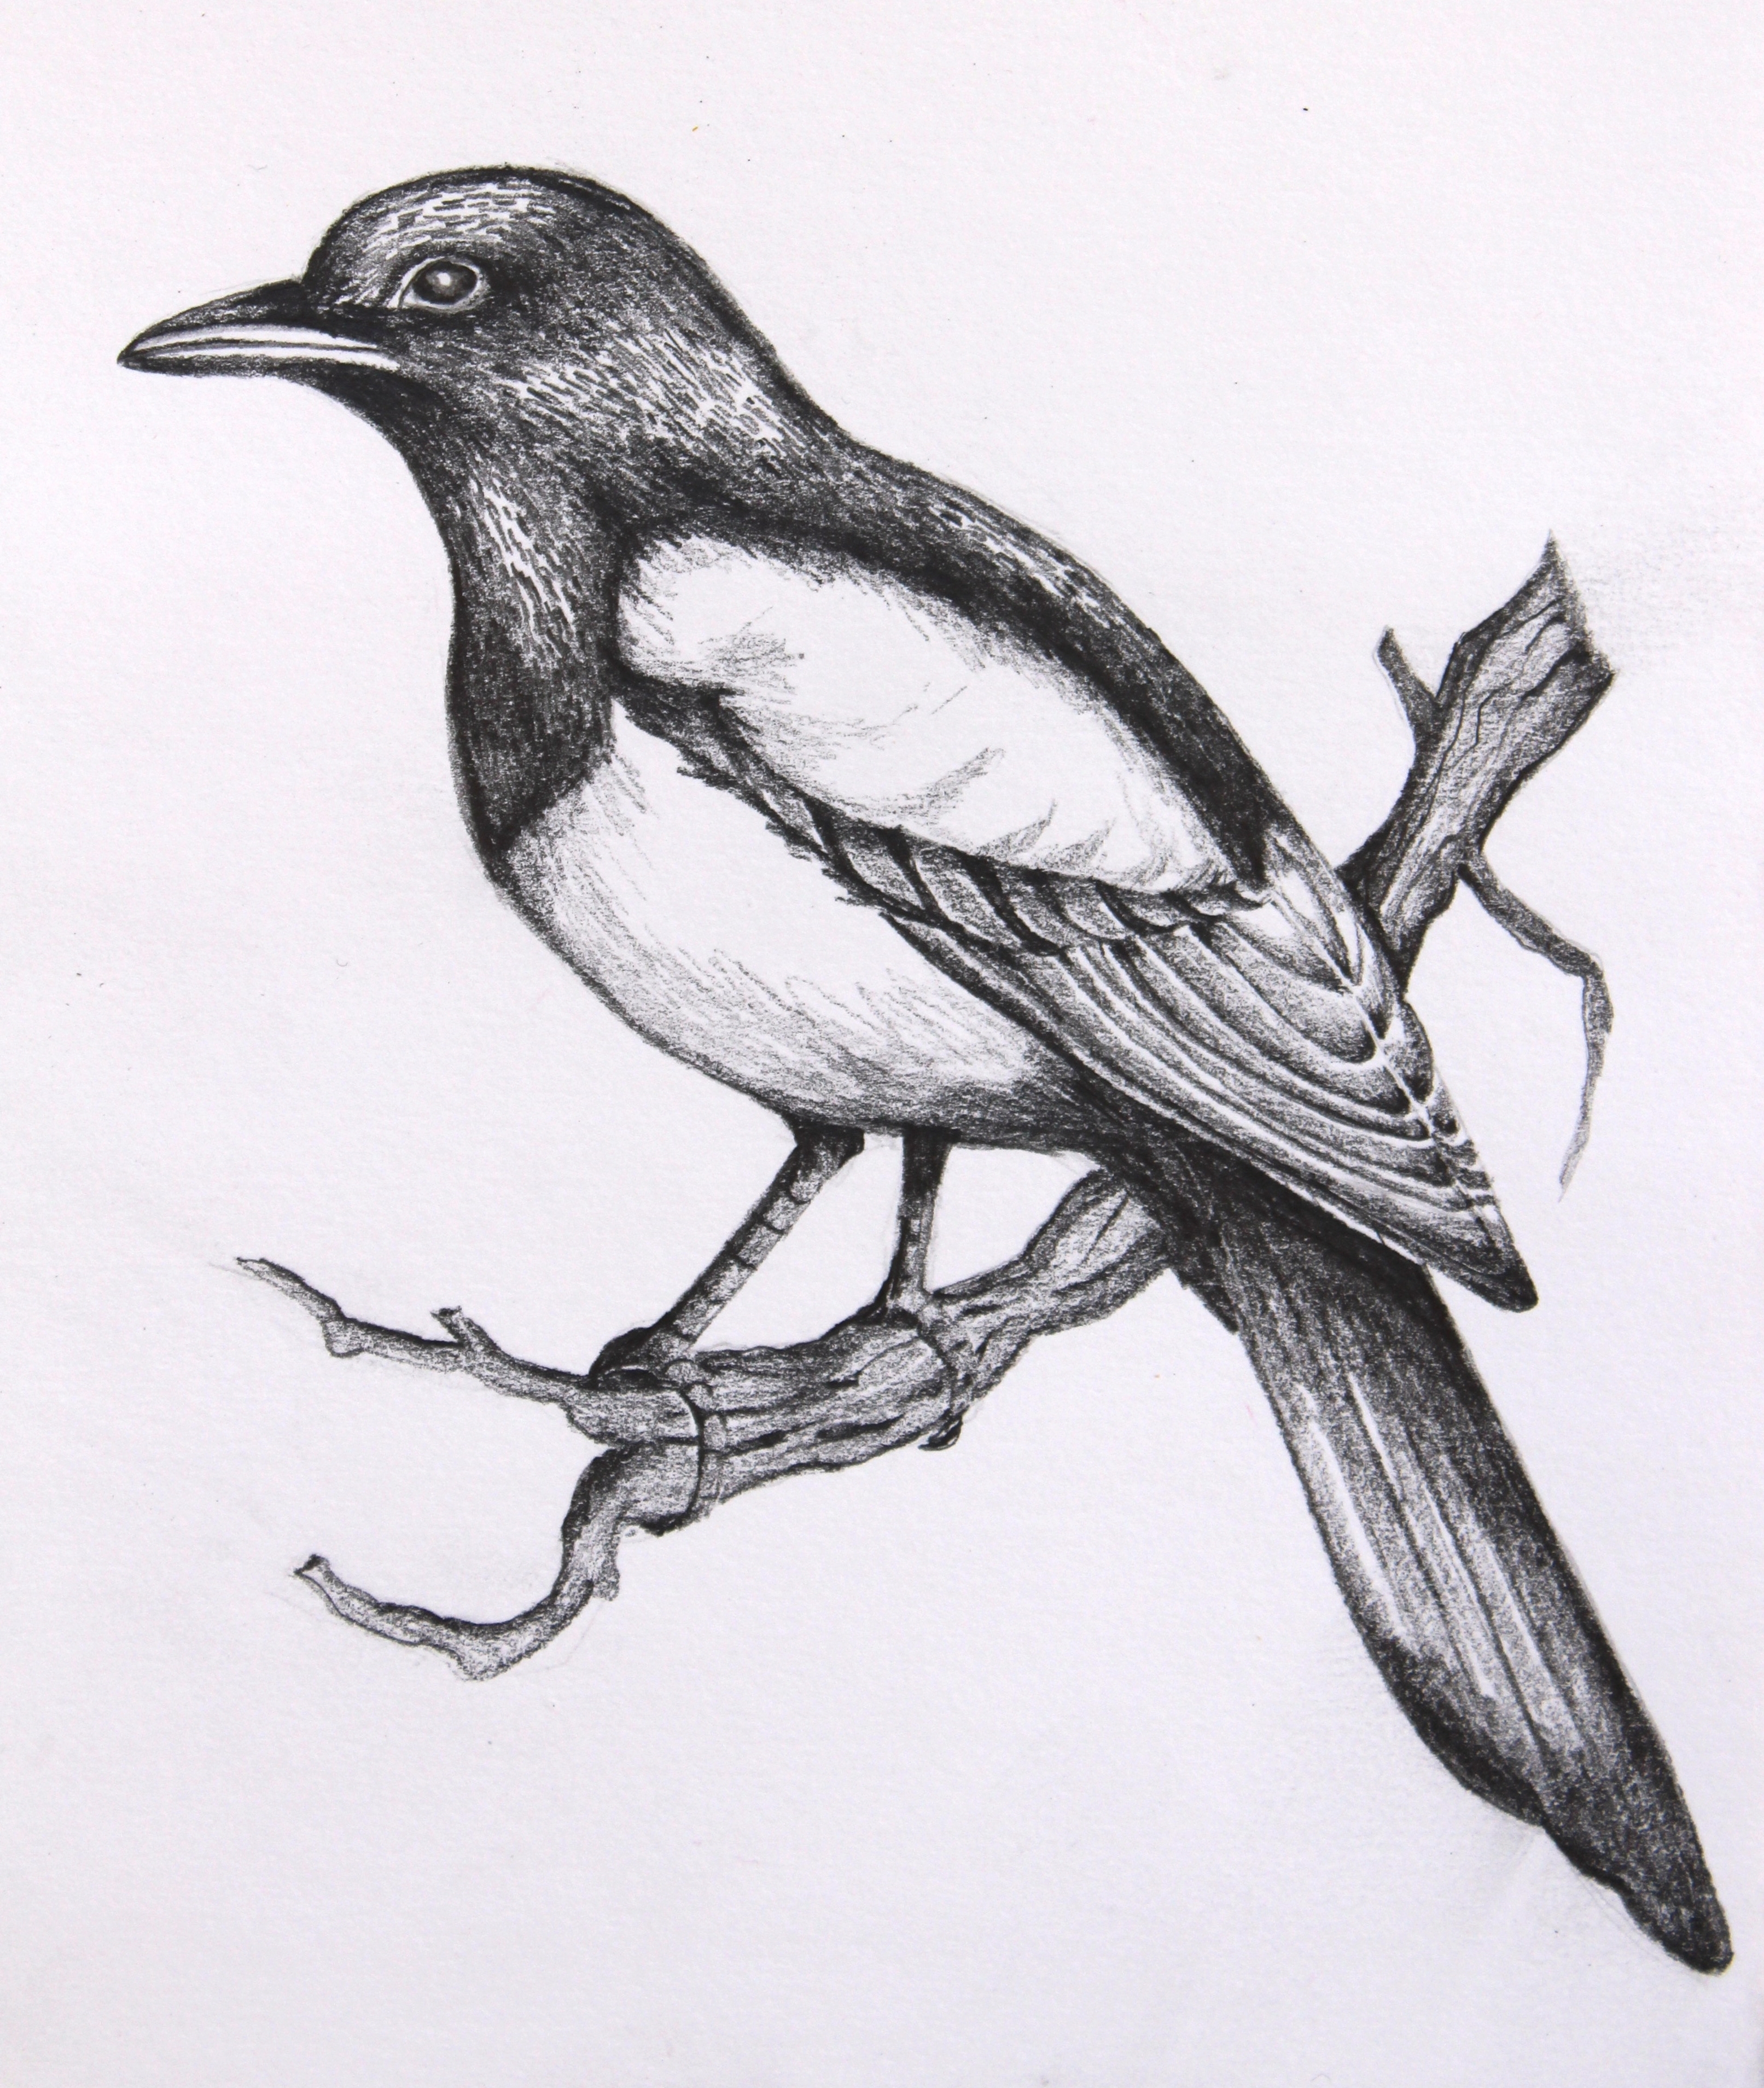  Pencil Sketches Of Birds at PaintingValley.com Explore 